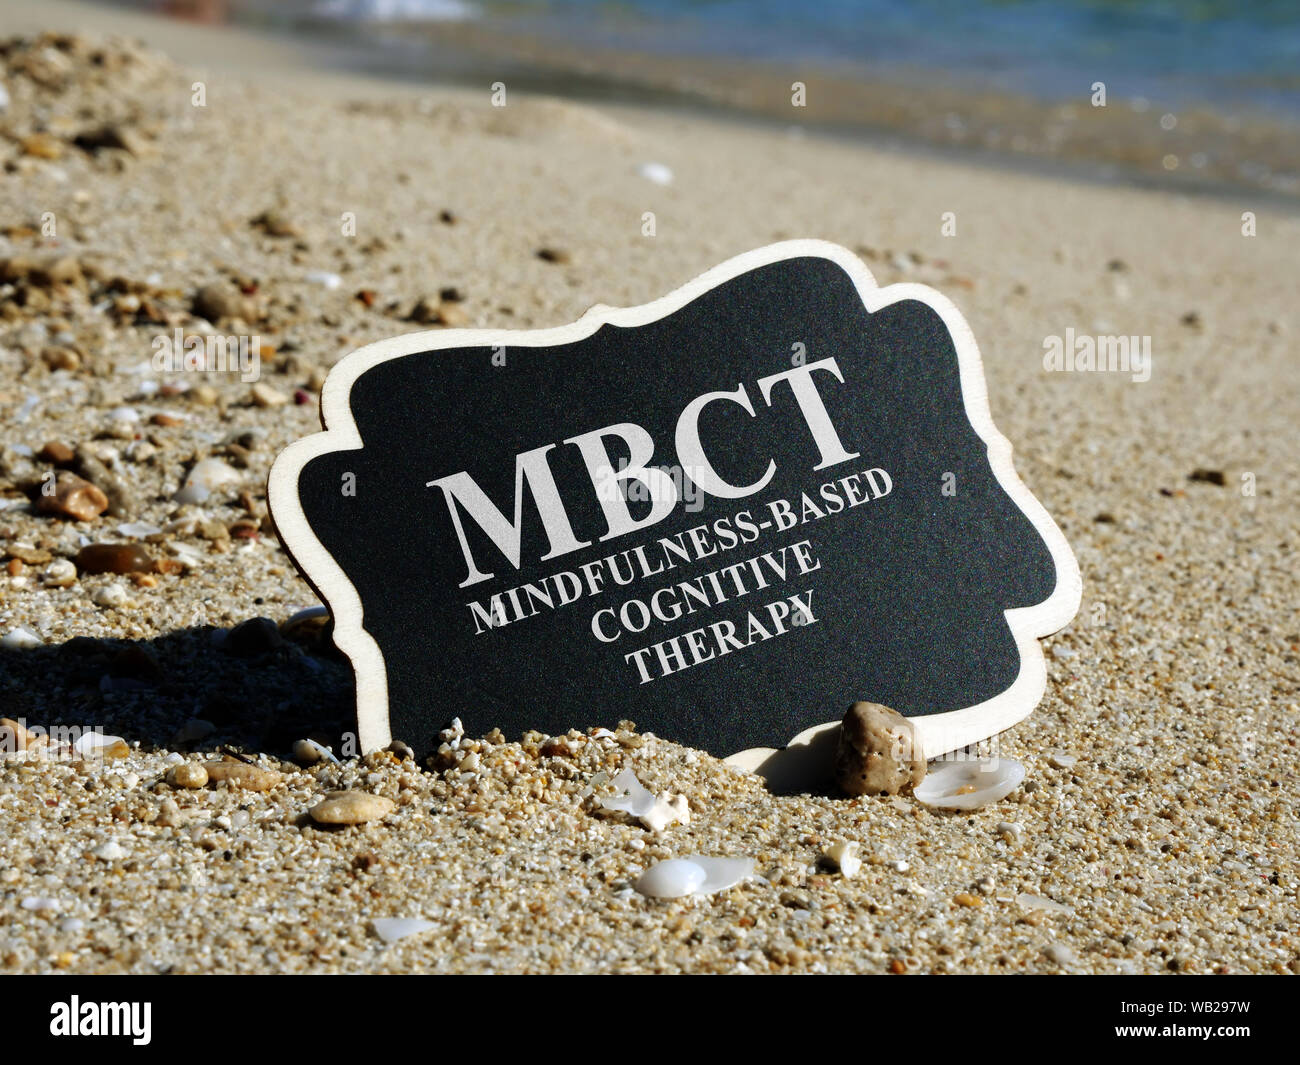 Mindfulness Based Cognitive Therapy MBCT written on plate. Stock Photo